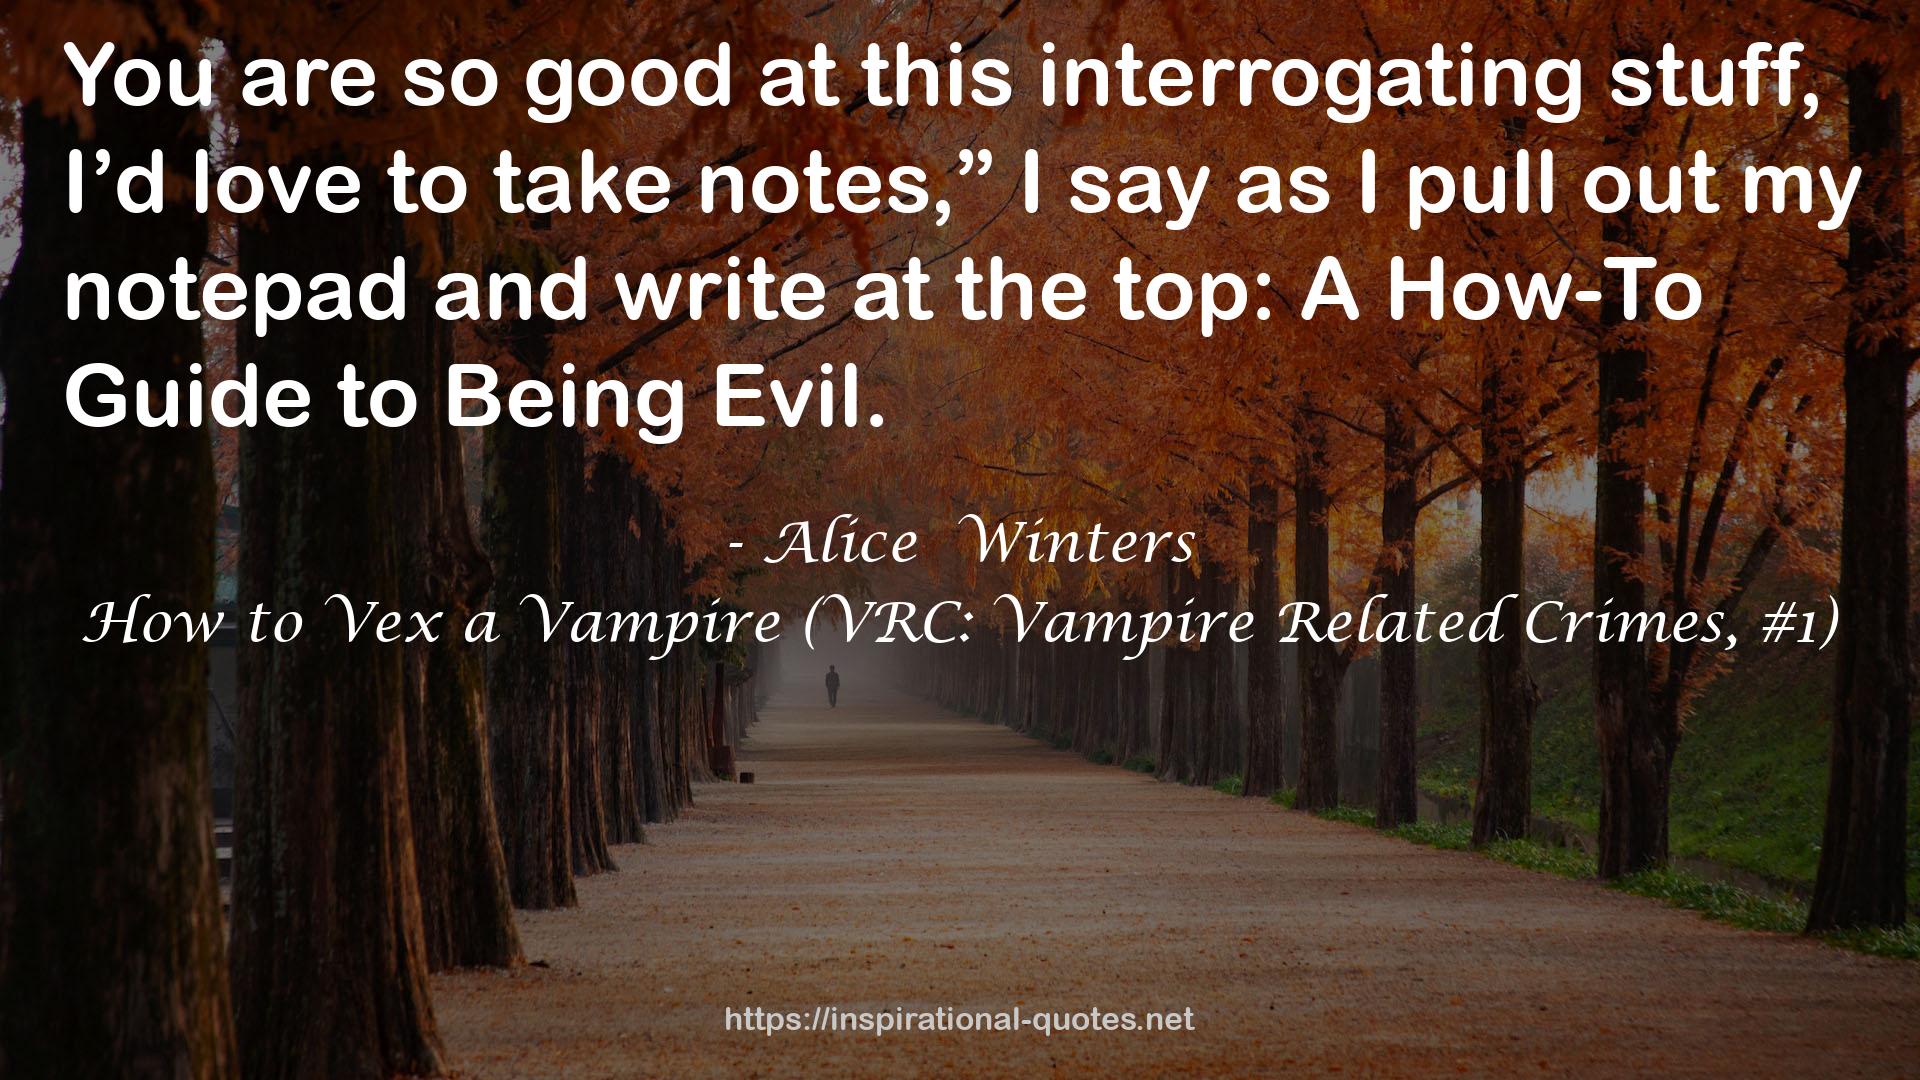 How to Vex a Vampire (VRC: Vampire Related Crimes, #1) QUOTES